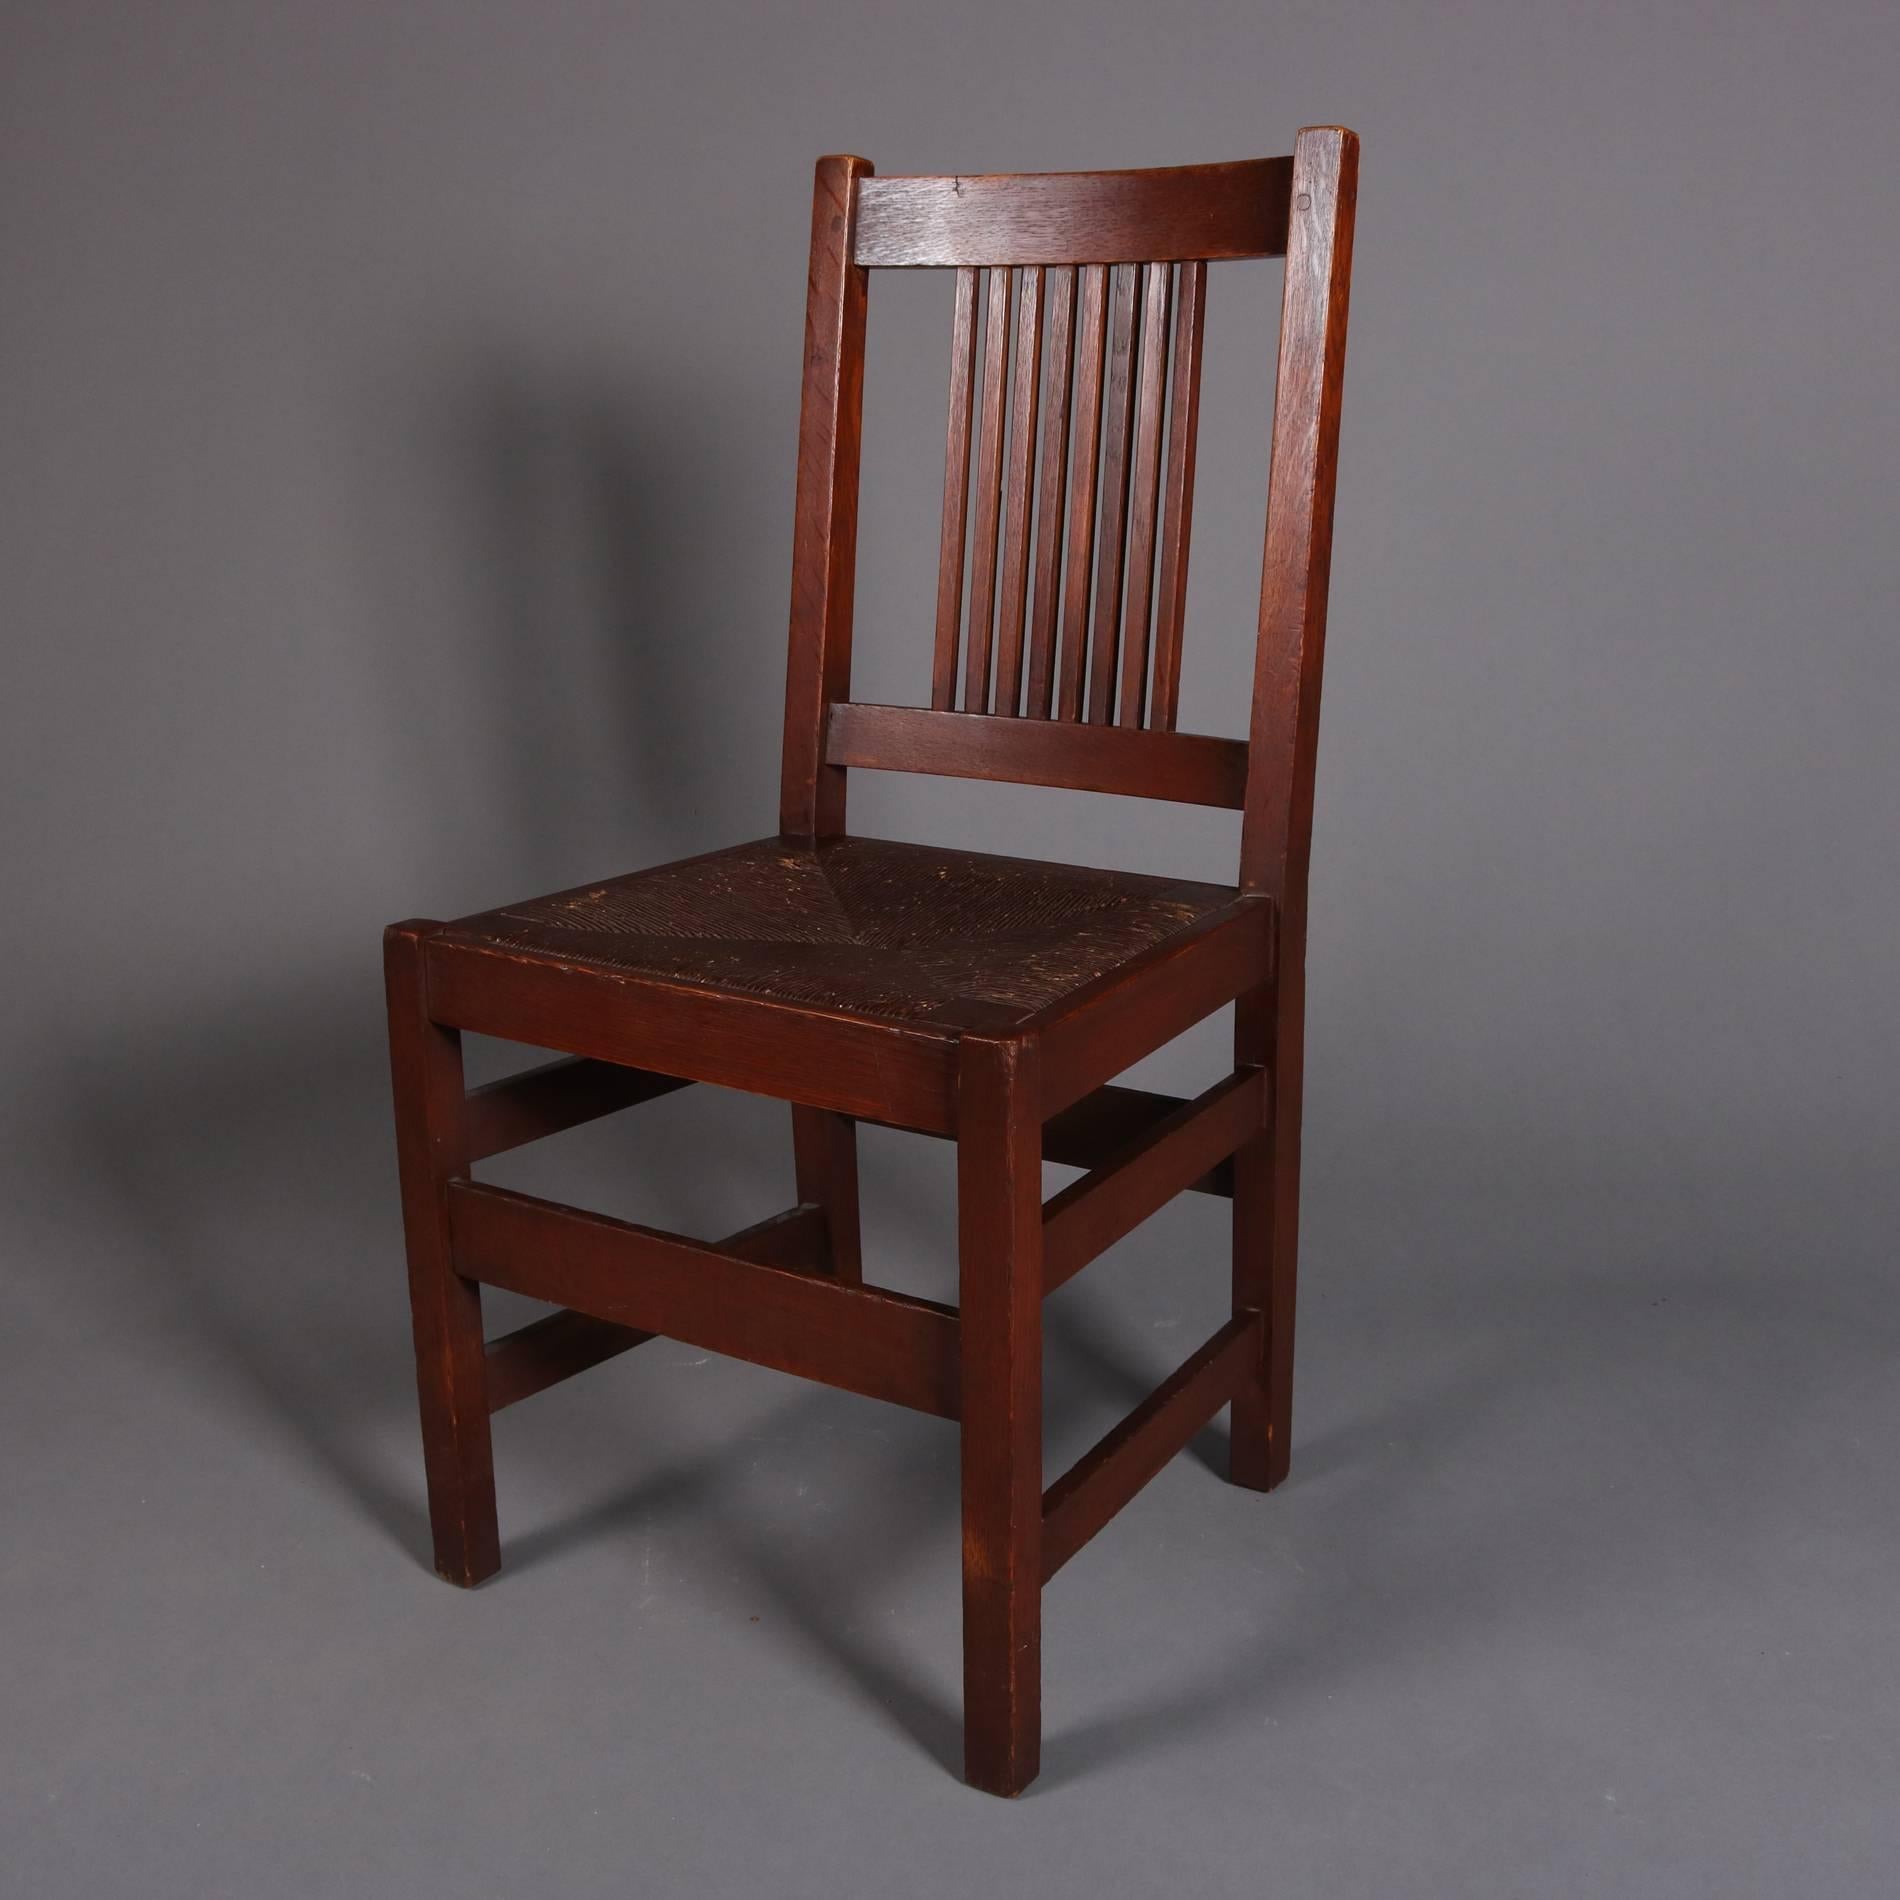 Four antique Arts & Crafts Mission Oak chairs by L. & J. G. Stickley feature spindle backs and rush seats, original labels, 20th century
 

Measure - 36